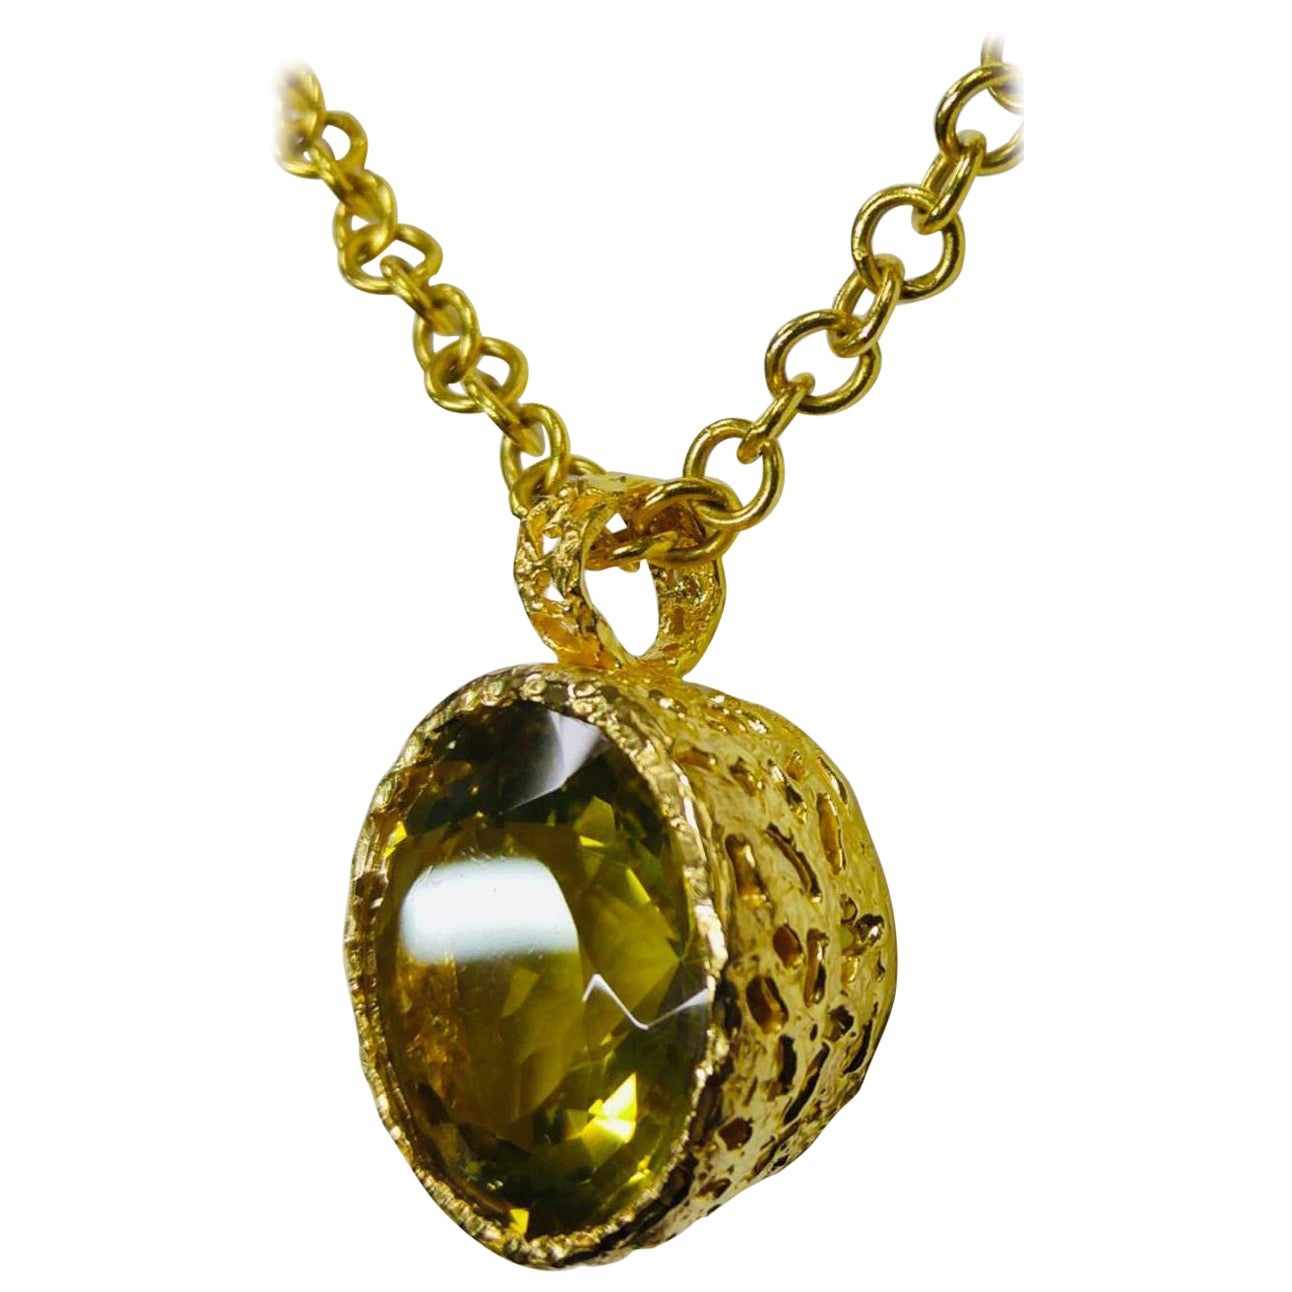 22k gold citrine pendant, hand carved, hand textured one of a kind. Part of the Power Collection which signifies a woman beauty, uniqueness and power. Sold with an 18k gold 16″ paperclip chain (not pictured) For every piece sold a portion of the